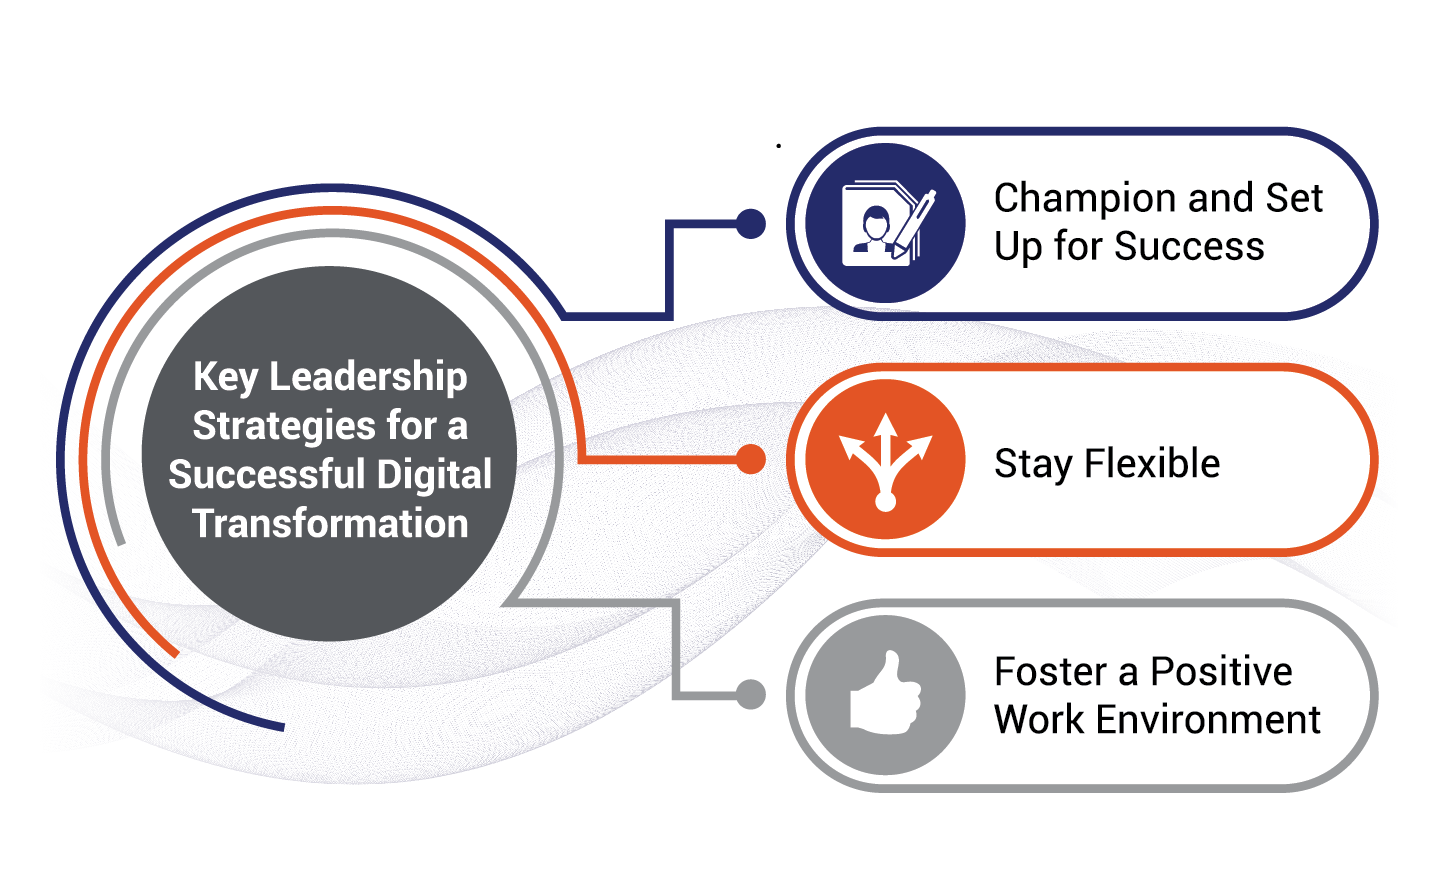 Key leadership strategies for a successful digital transformation: champion and set up for success, stay flexible, and foster a positive work environment.